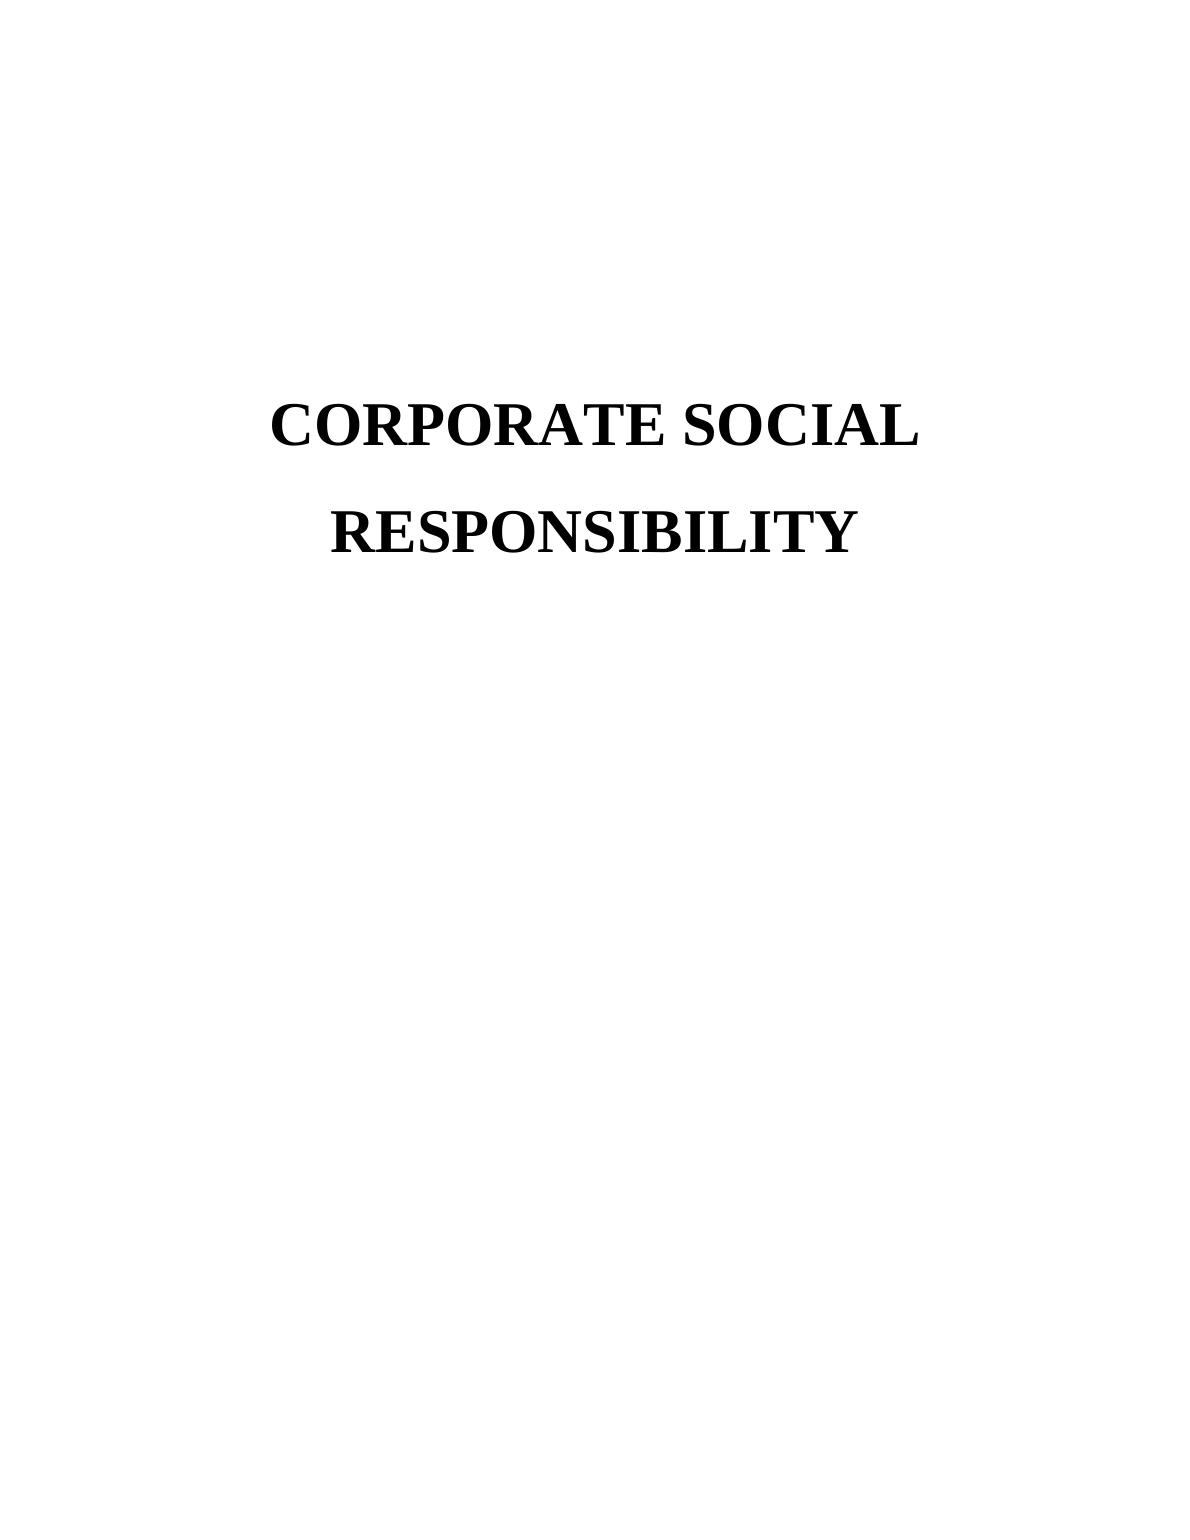 Corporate Social Responsibility: Legal Obligation for Business_1